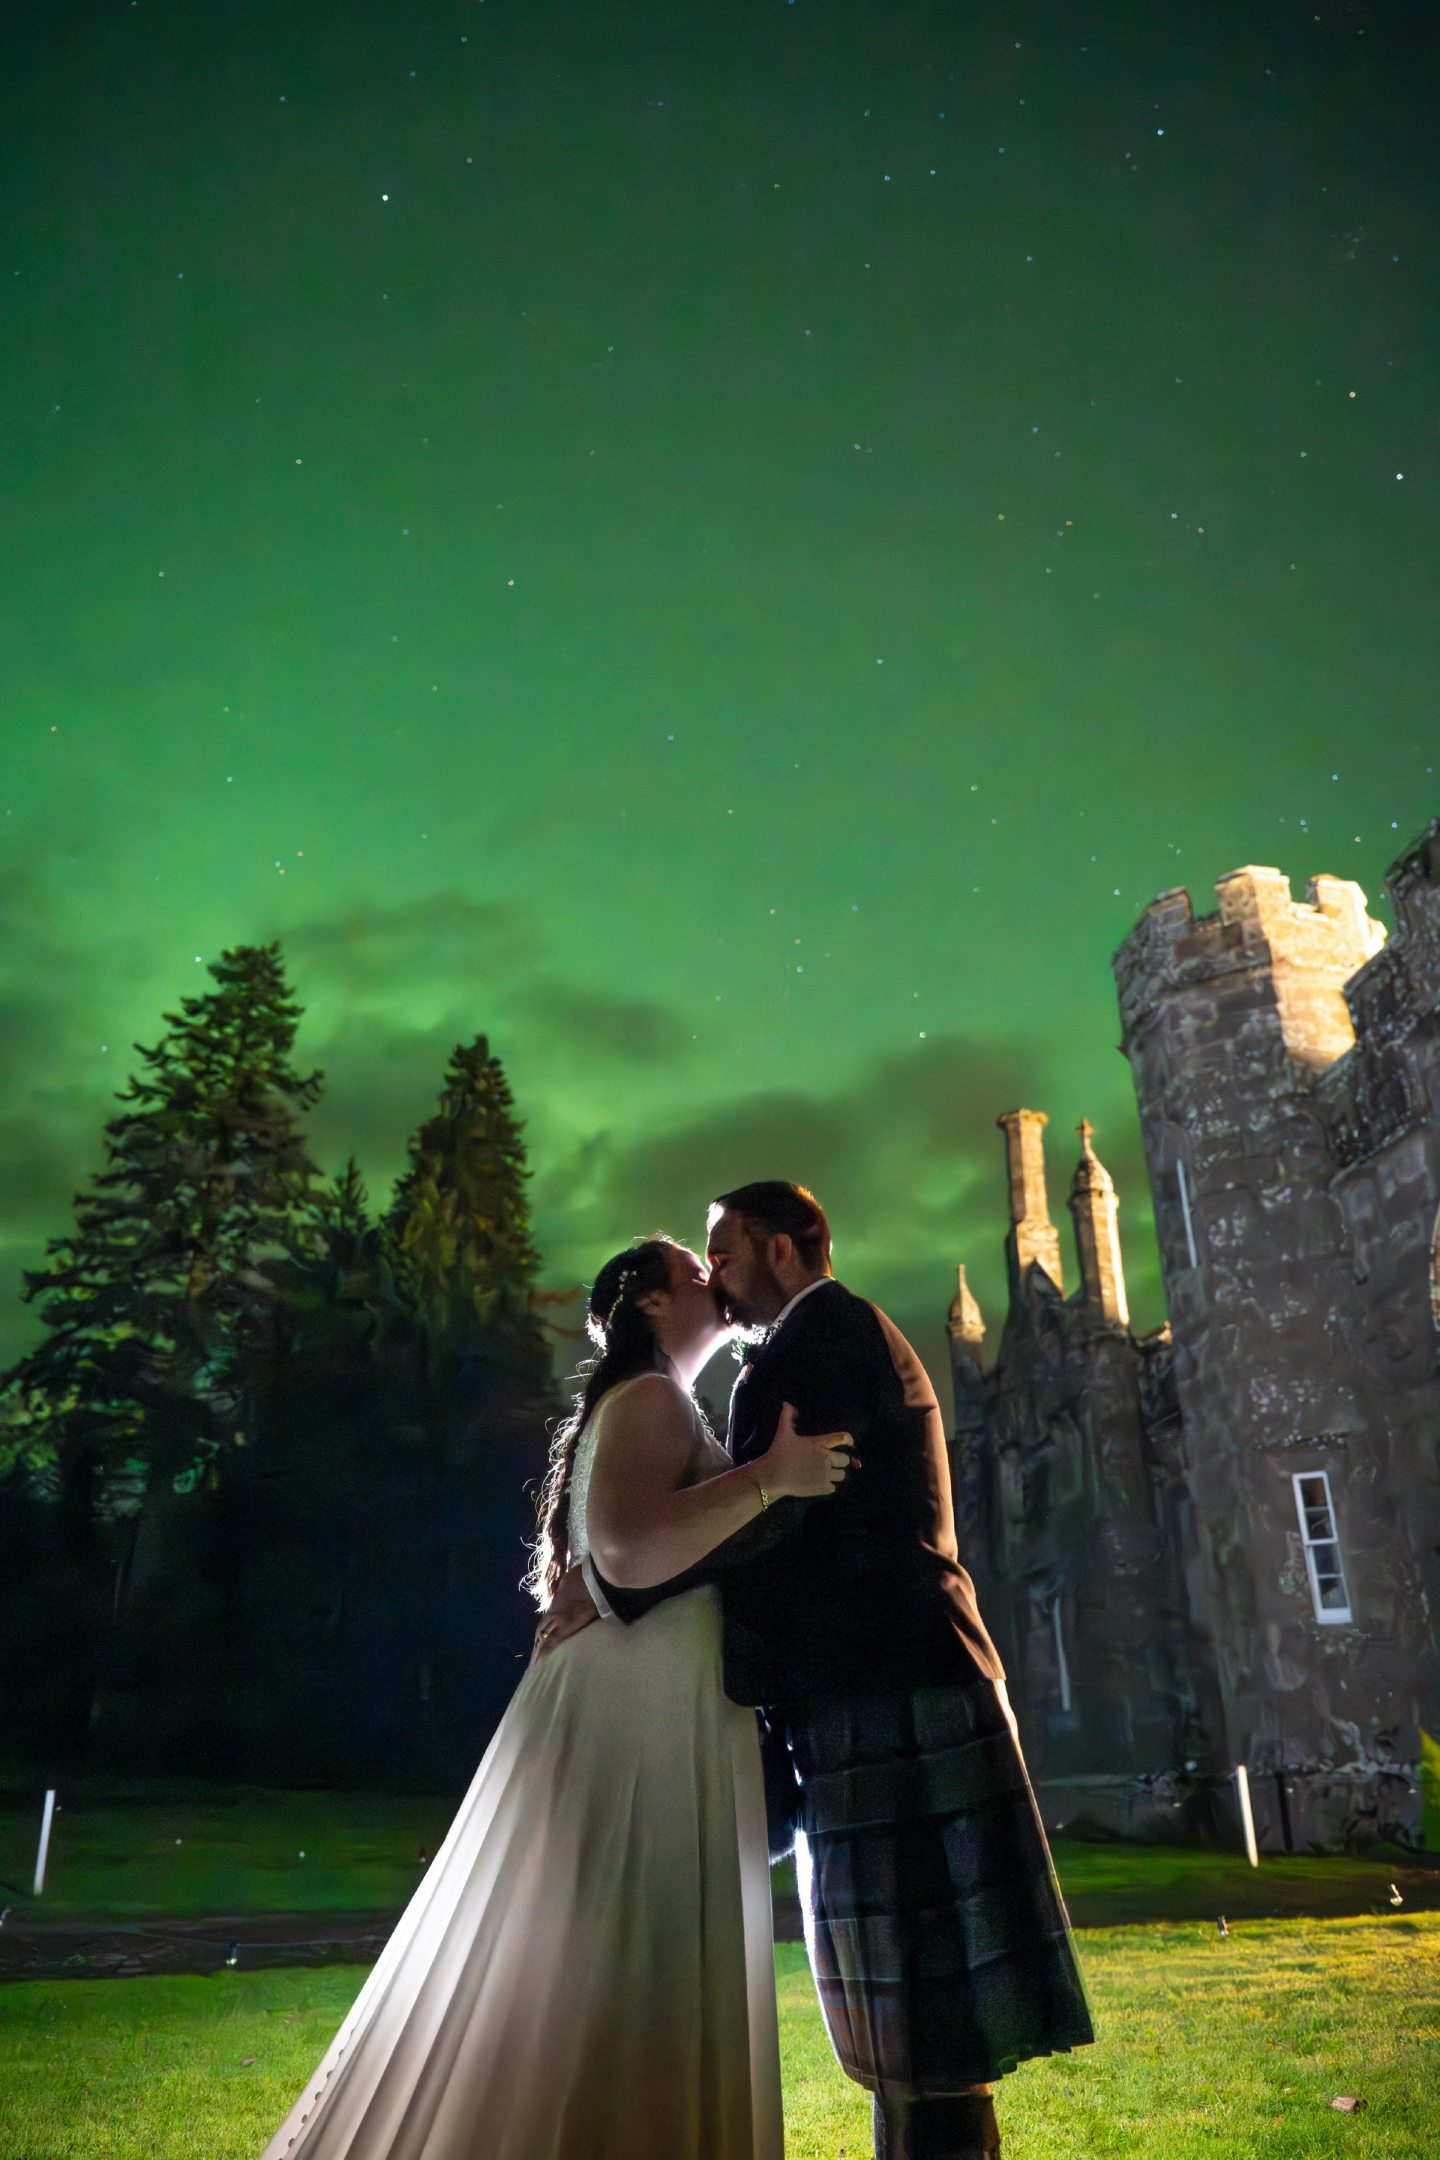 Wedding photo of Claire and Alasdair Macdonald embracing under the Northern Lights on Abercairny estate in Perthshire.